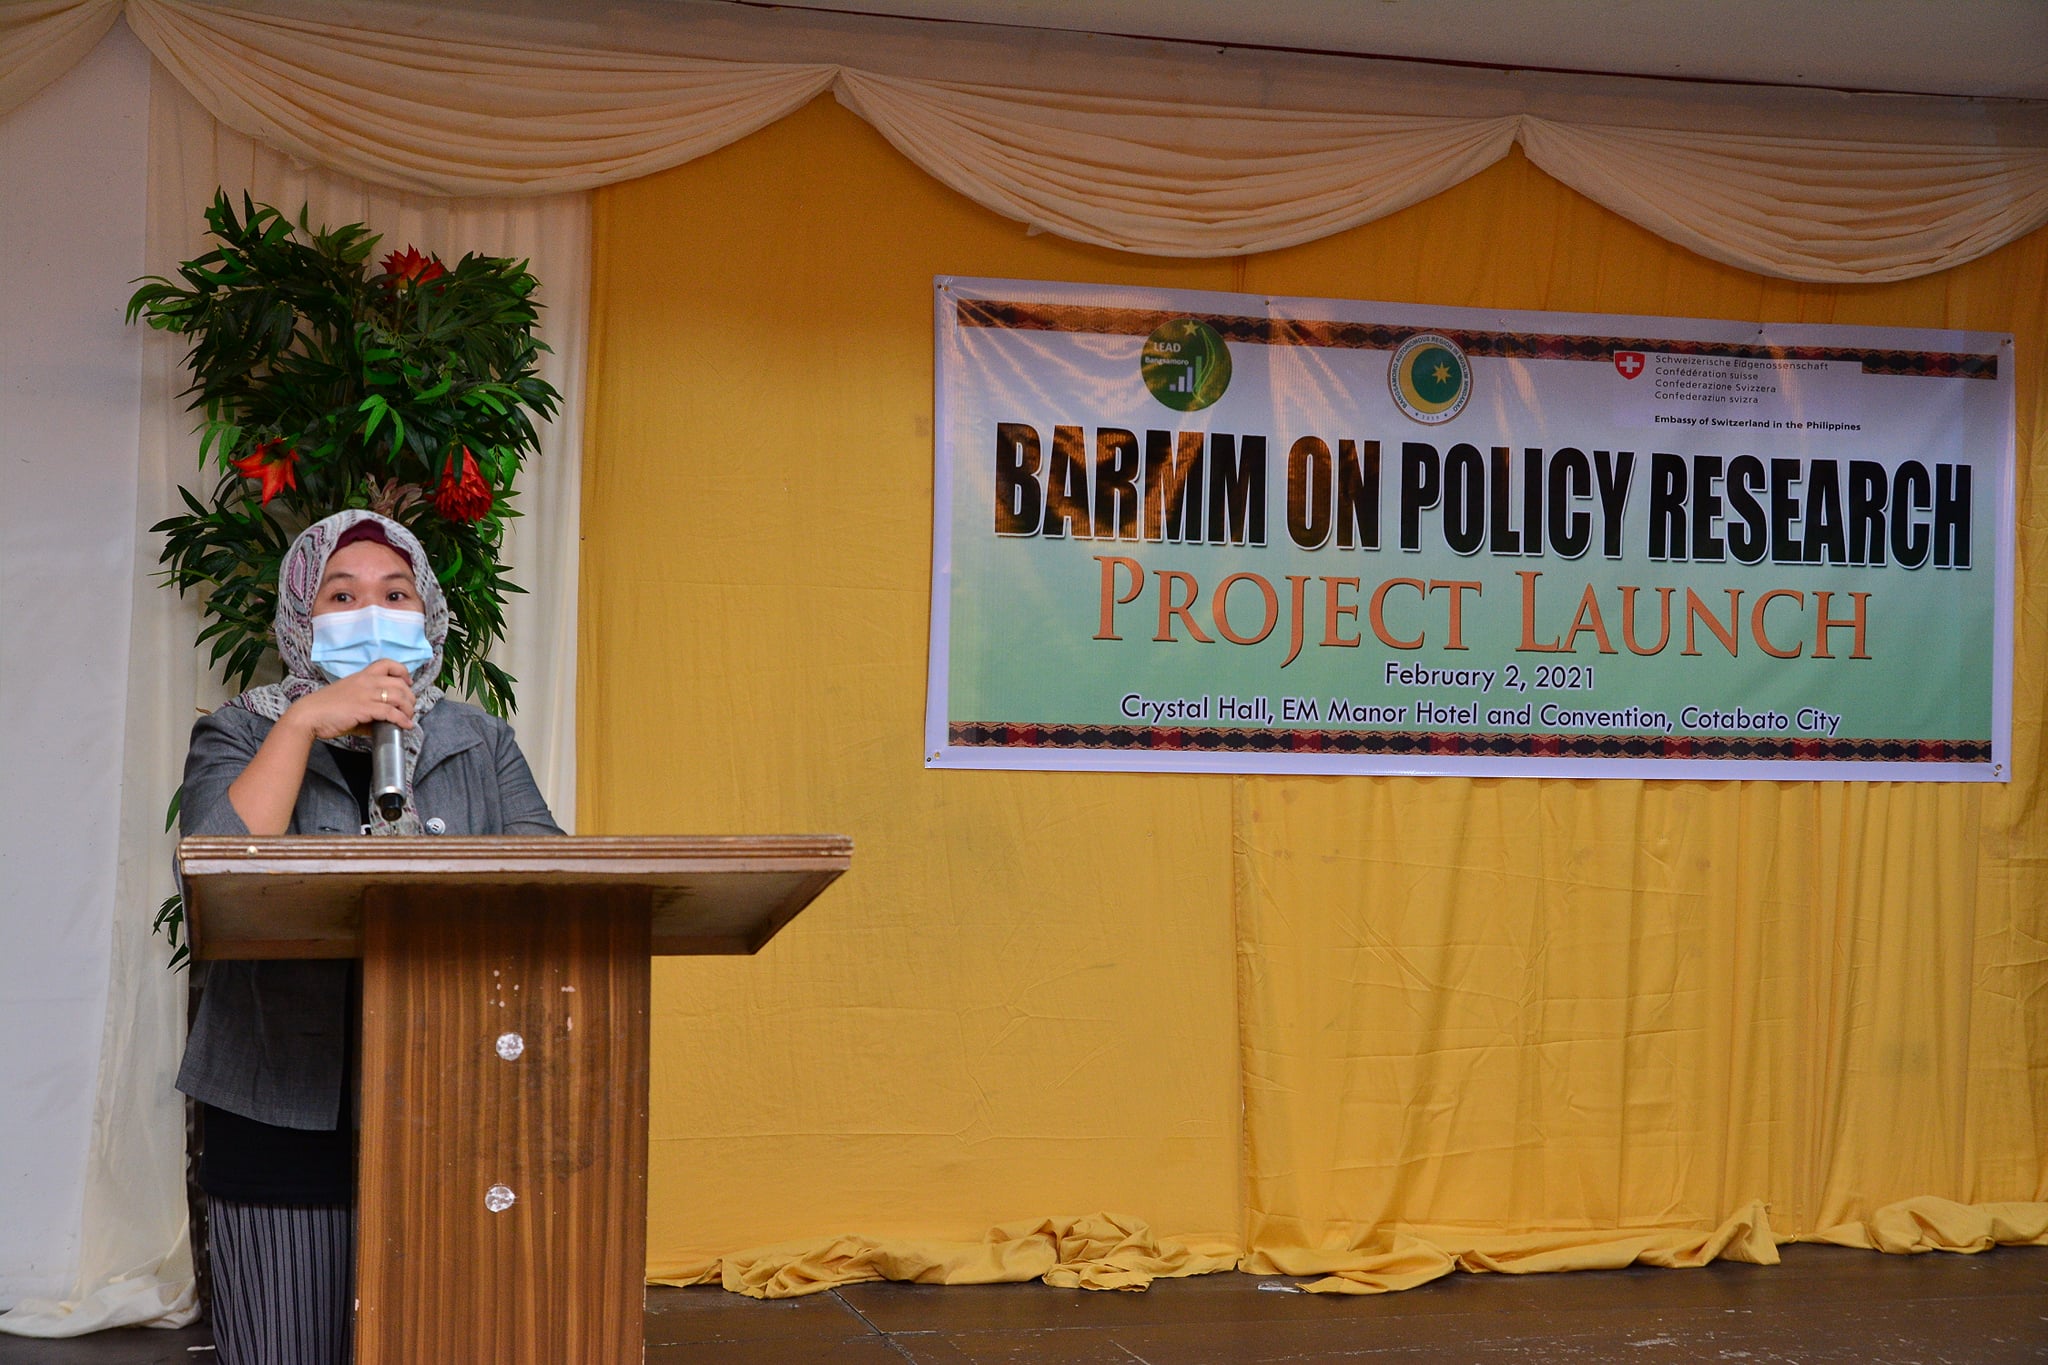 You are currently viewing The Leadership Advocacy (LEAD) Bangsamoro launched the BARMM on Policy Research Project on February 02, 2021 at Crystall Hall, Em Manor Hotel and Convention Center.